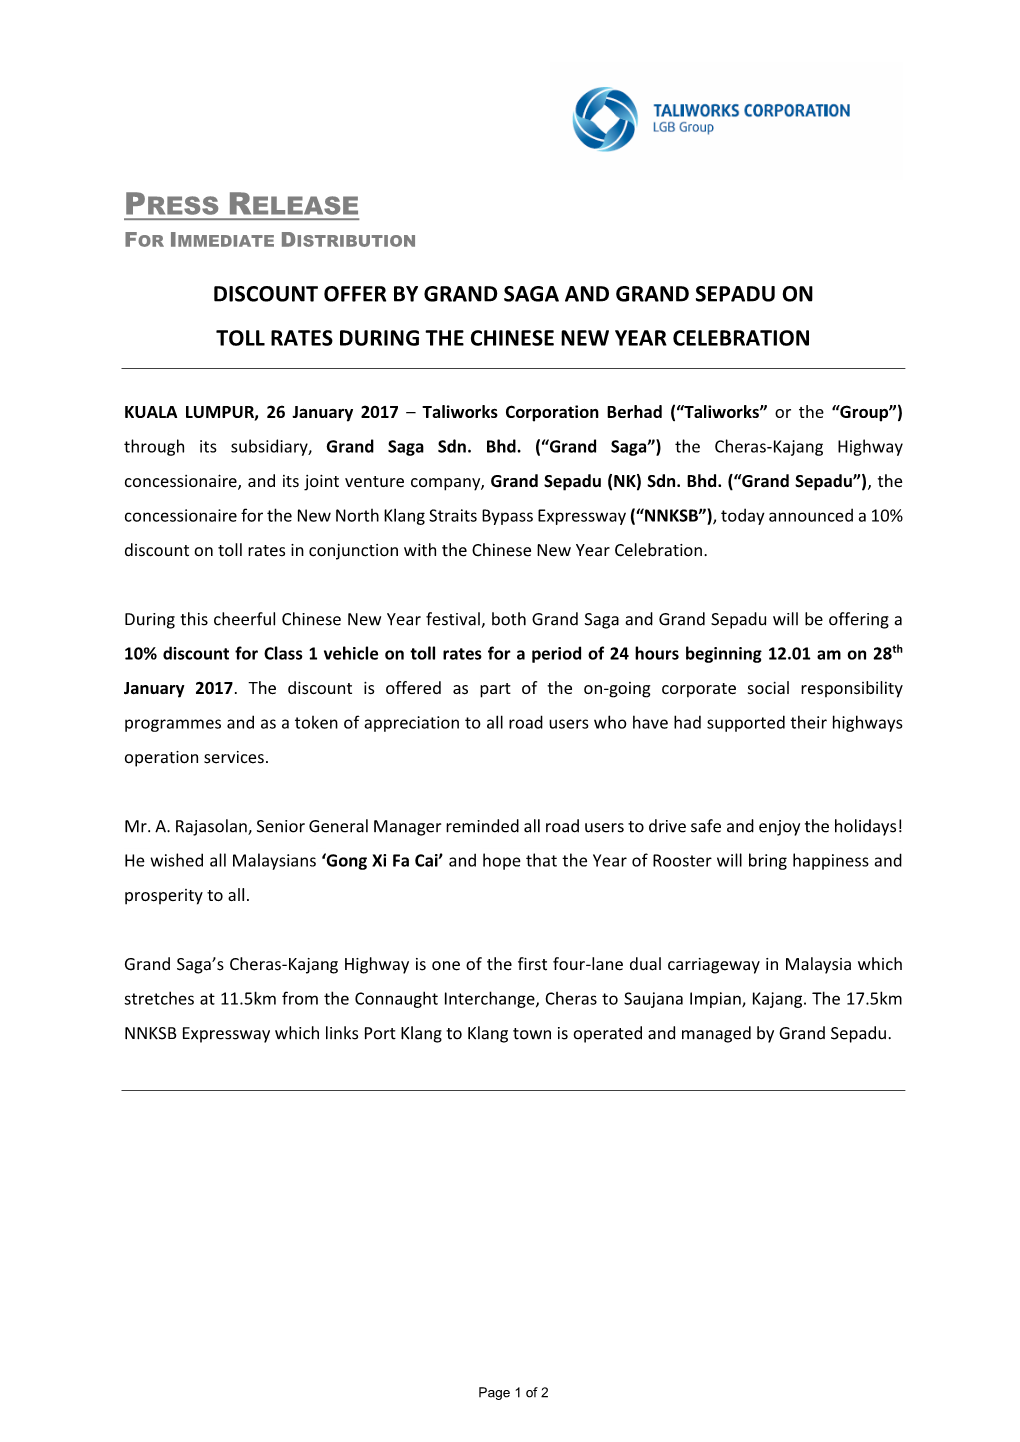 Press Release Discount Offer by Grand Saga and Grand